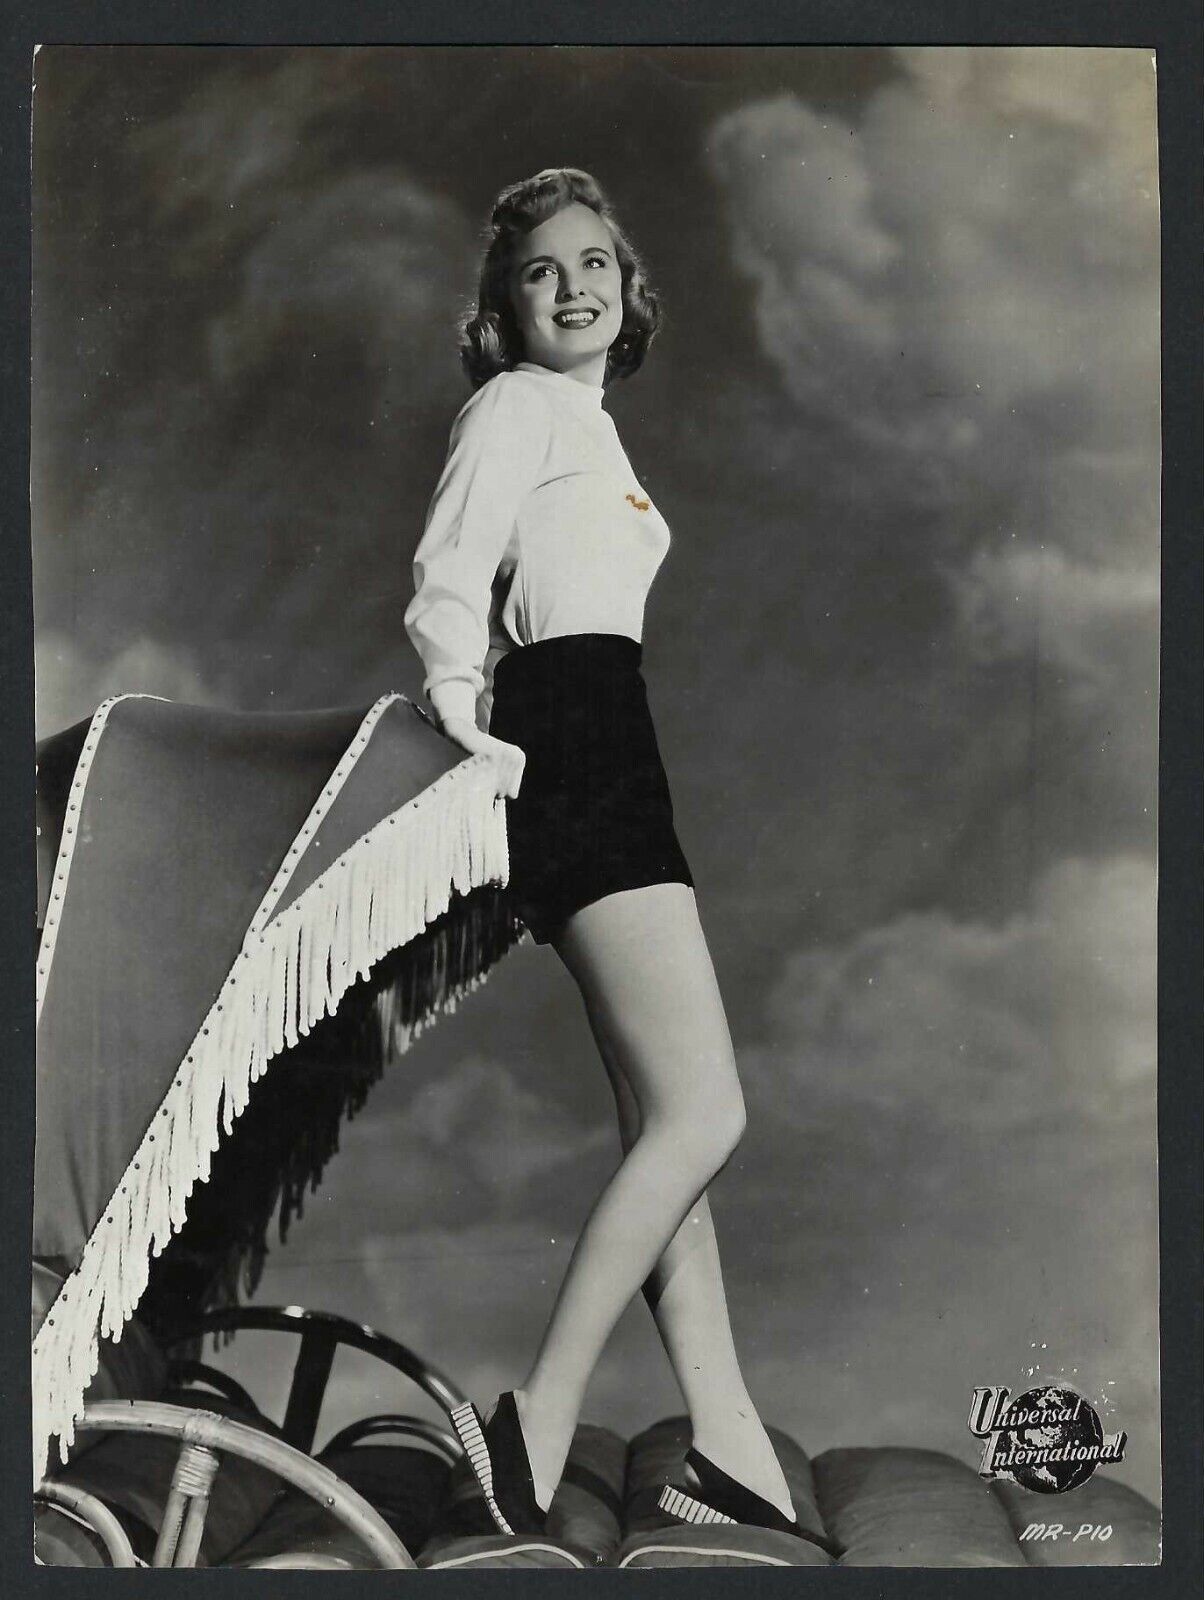 UNKNOW HOLLYWOOD ACTRESS EXQUISITE STUNNING VTG ORIGINAL PHOTO